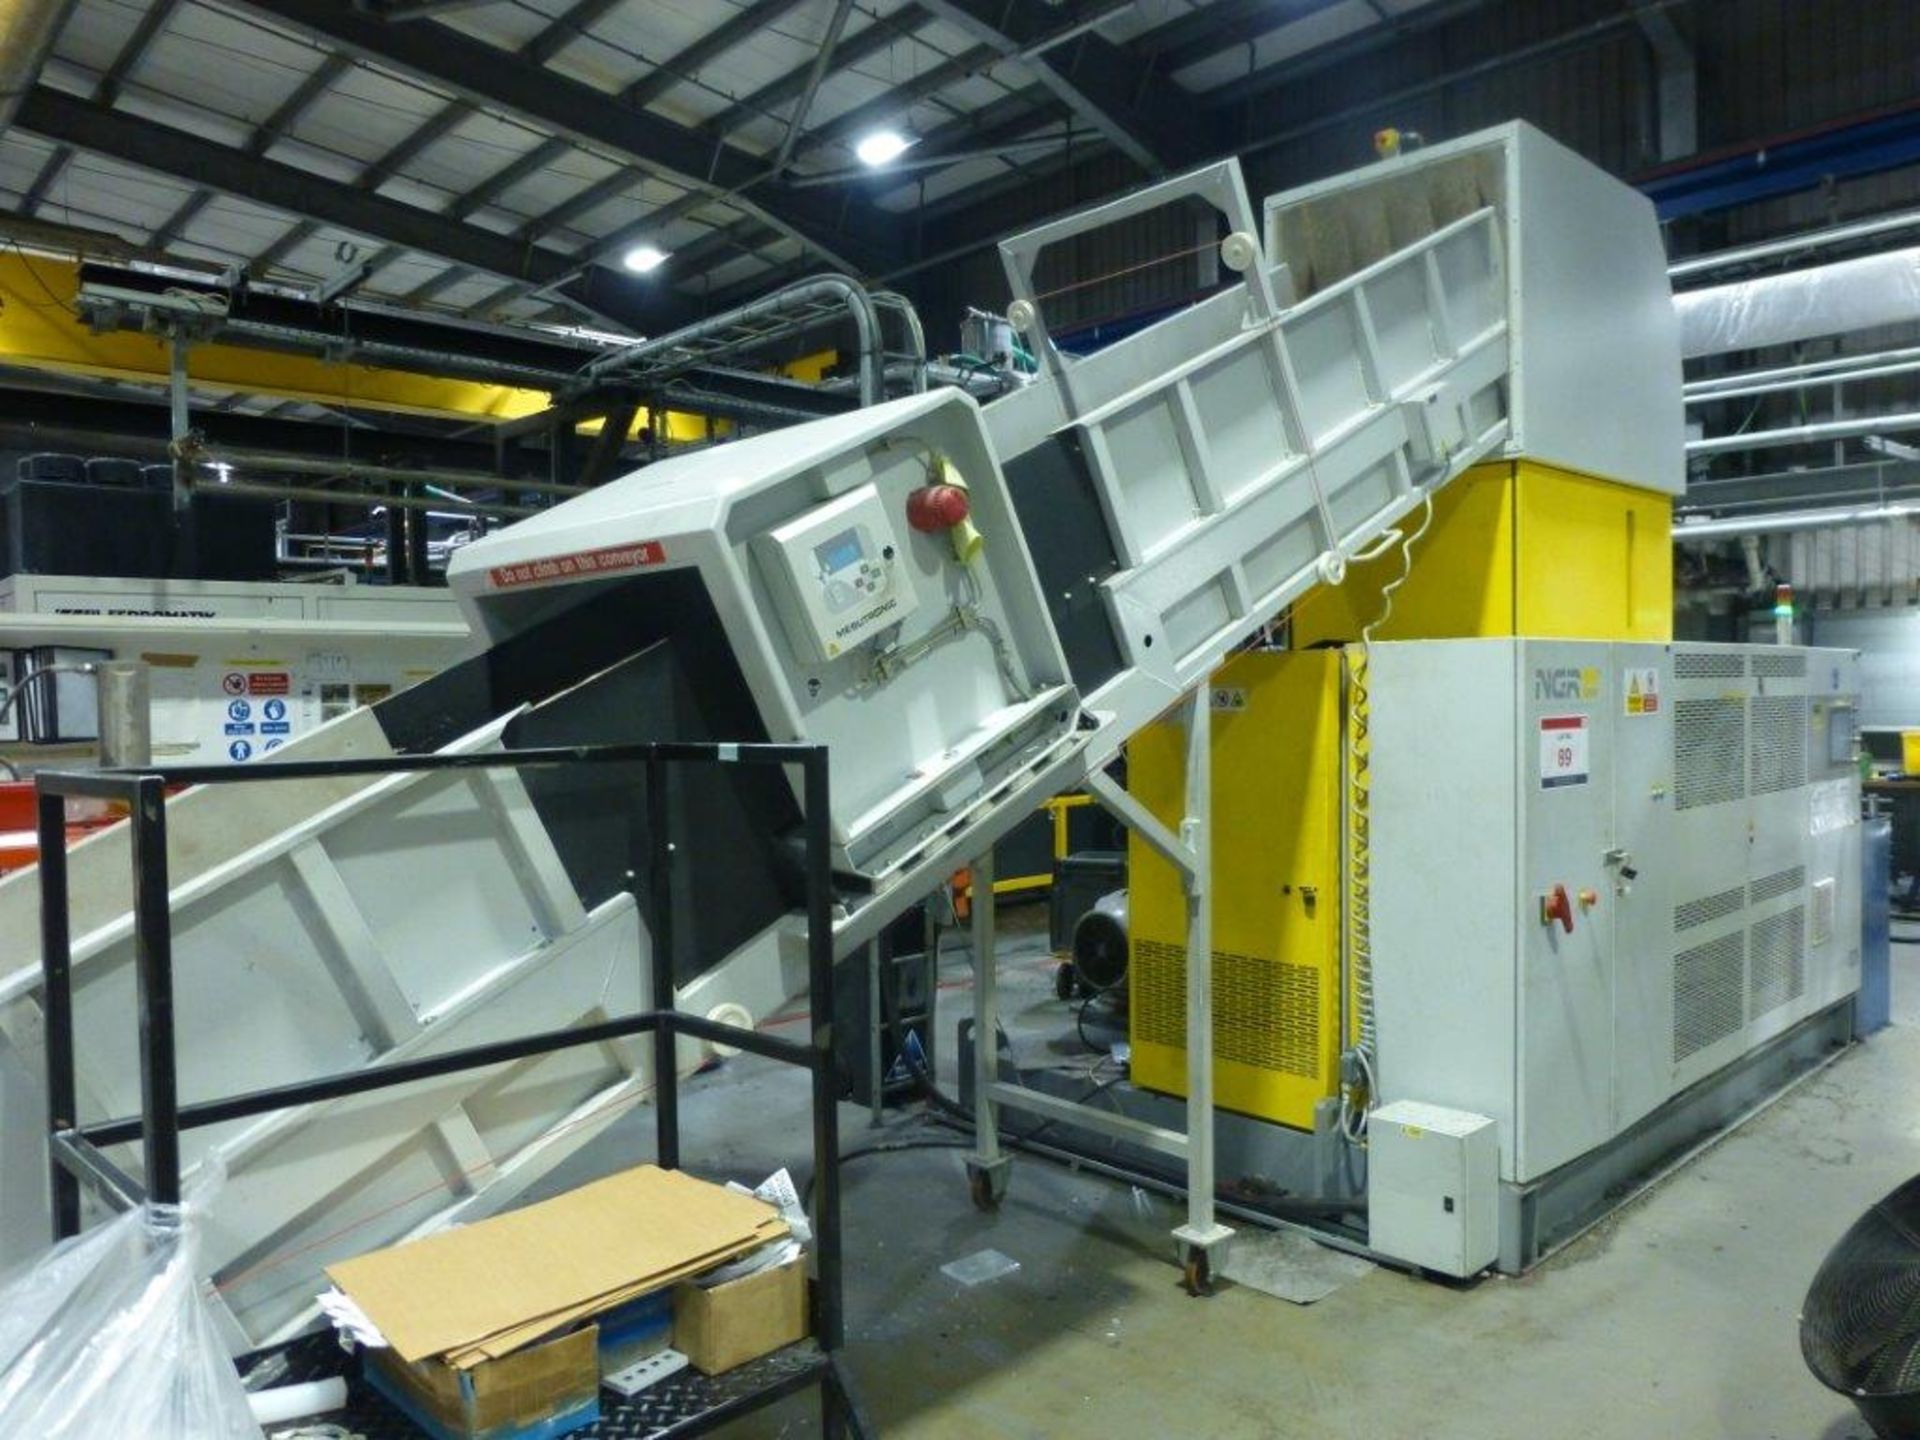 NGR Palletising & Recycling Line, comprising SM 5.6m x 800mm elevating Infeed conveyor, Mesutronic